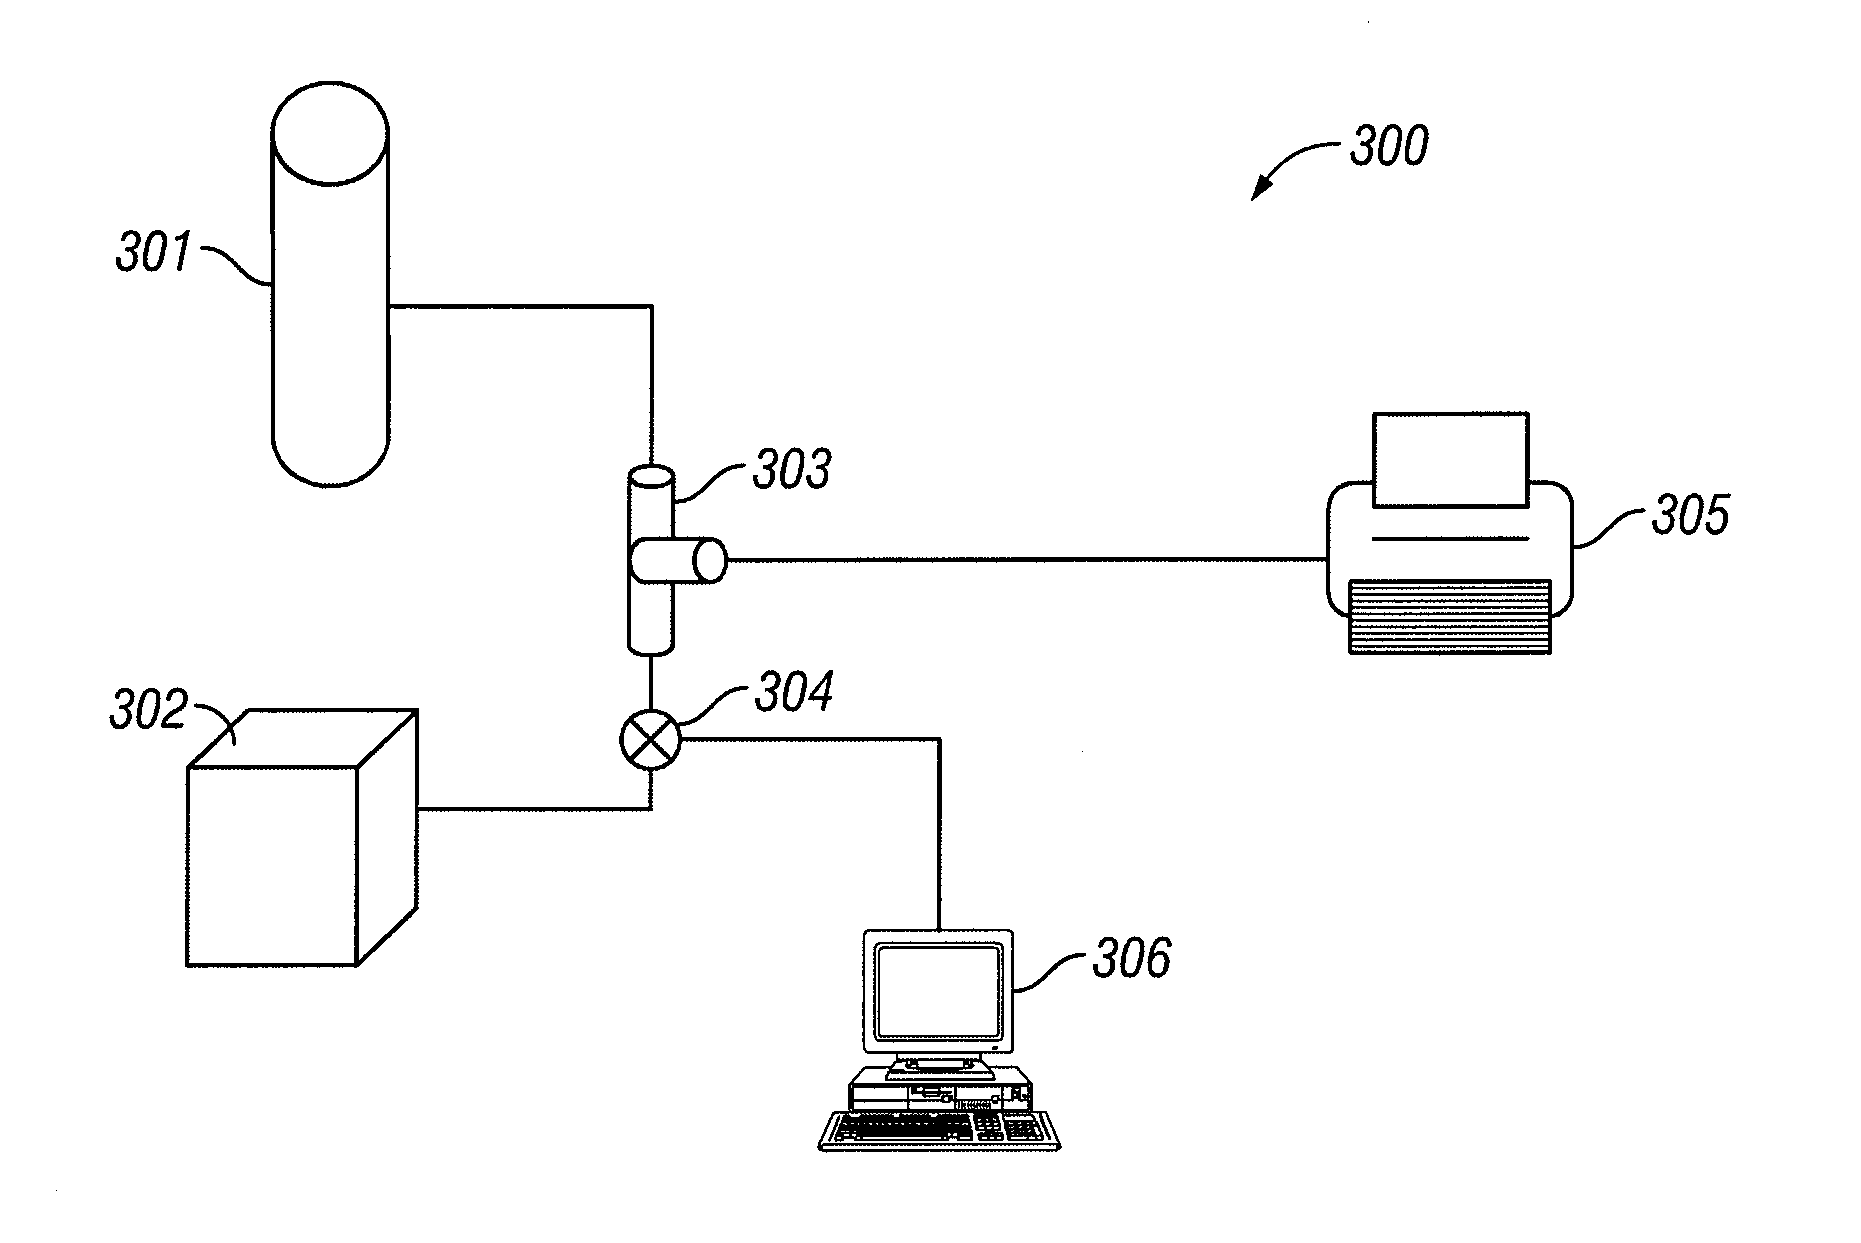 InkJet printer with controlled oxygen levels